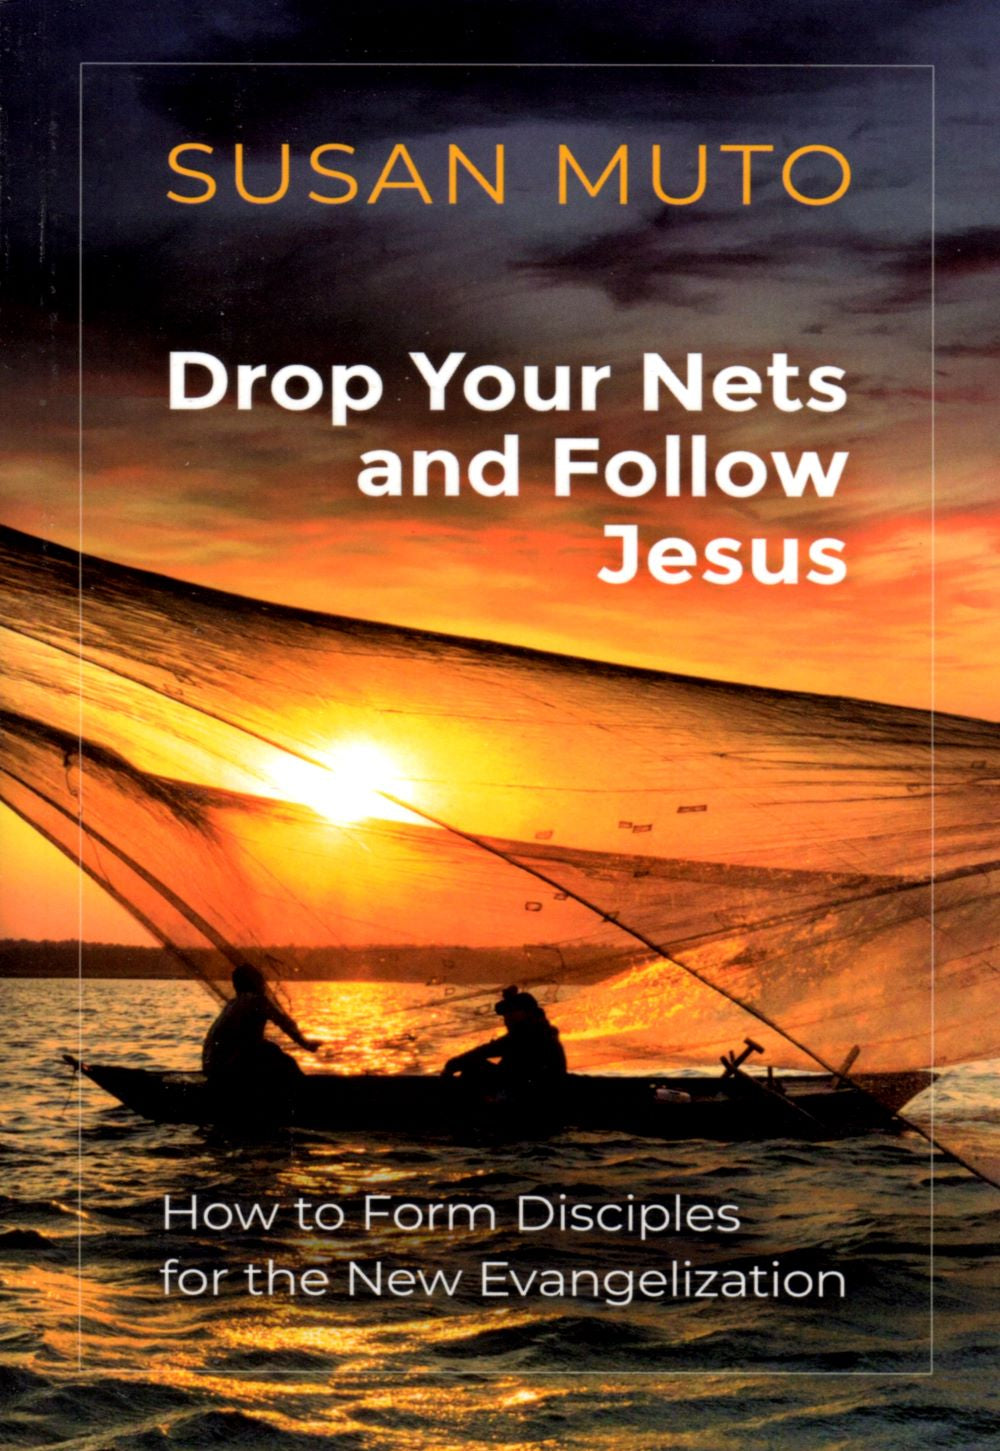 Drop your Nets and follow Jesus (2019)